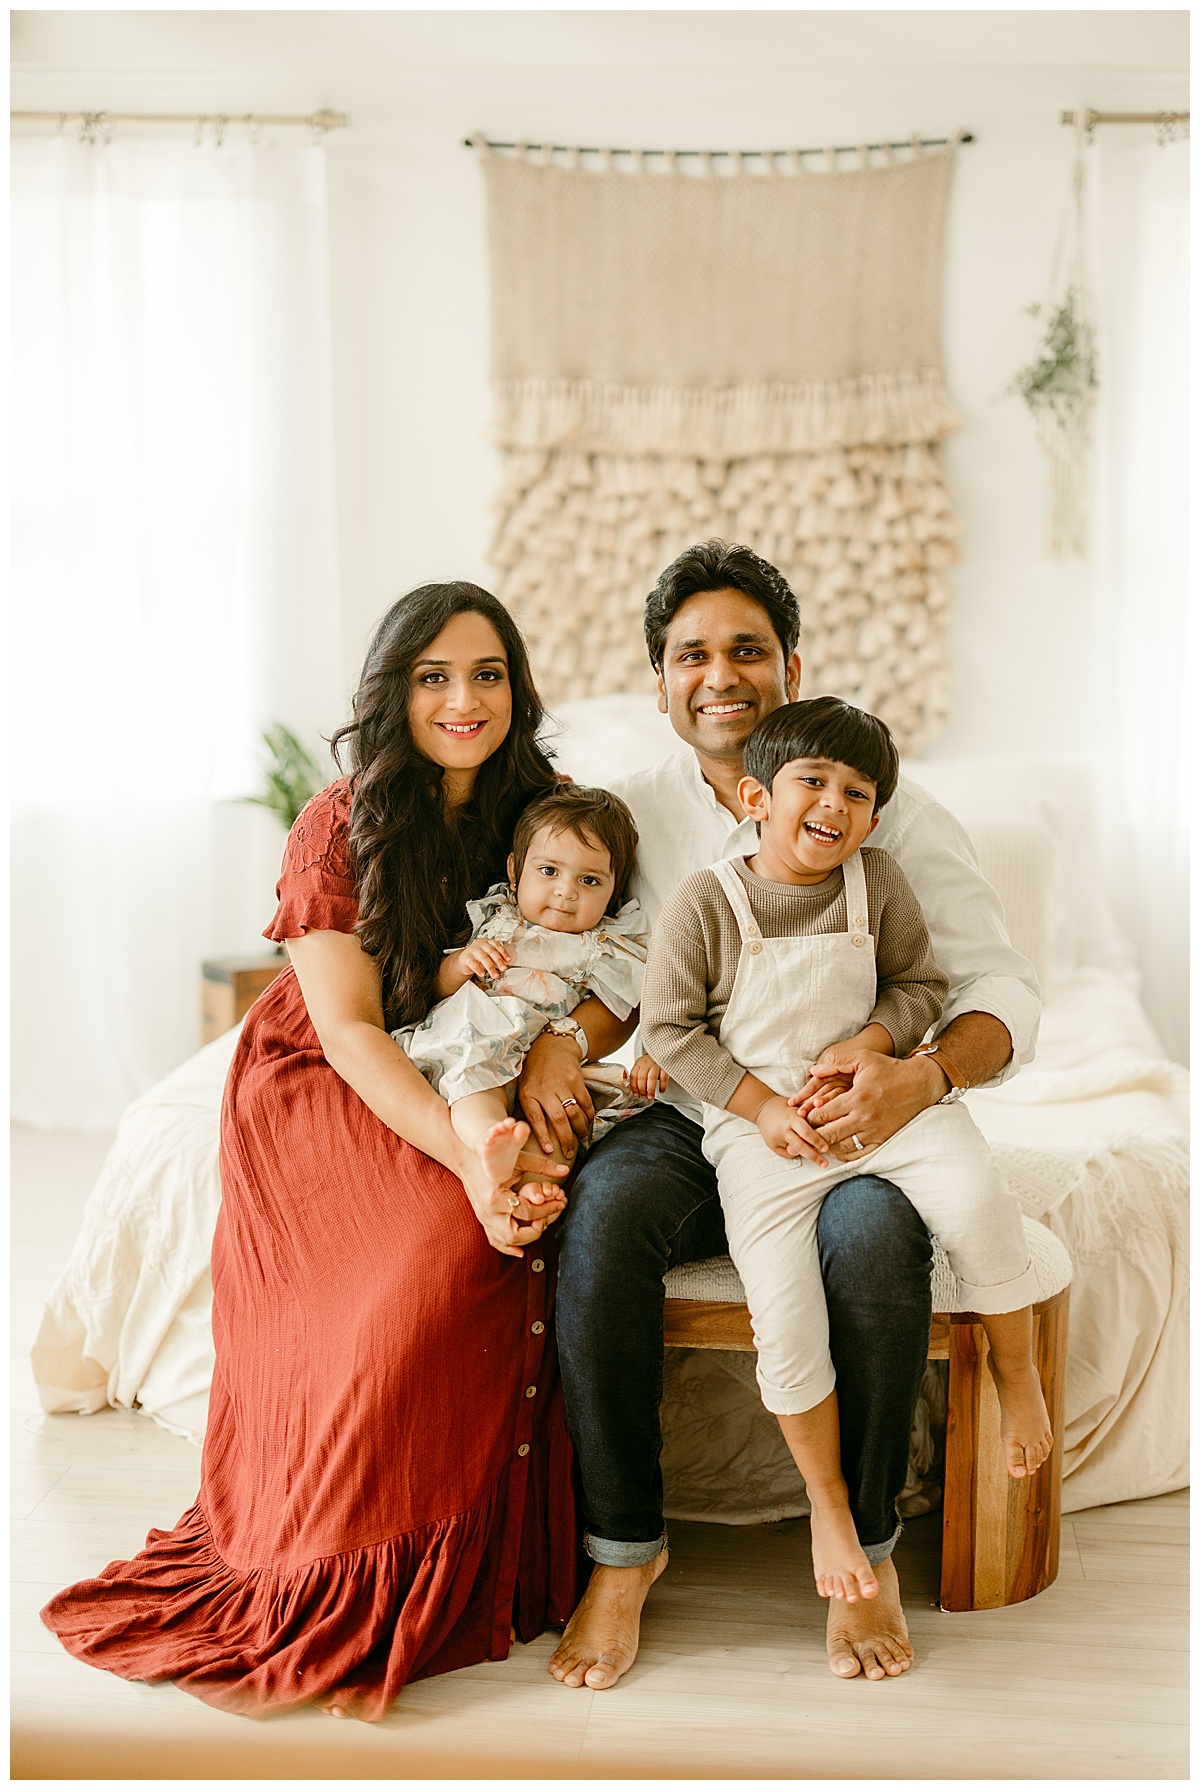 Family smiles together on the bed for Norma Fayak Photography